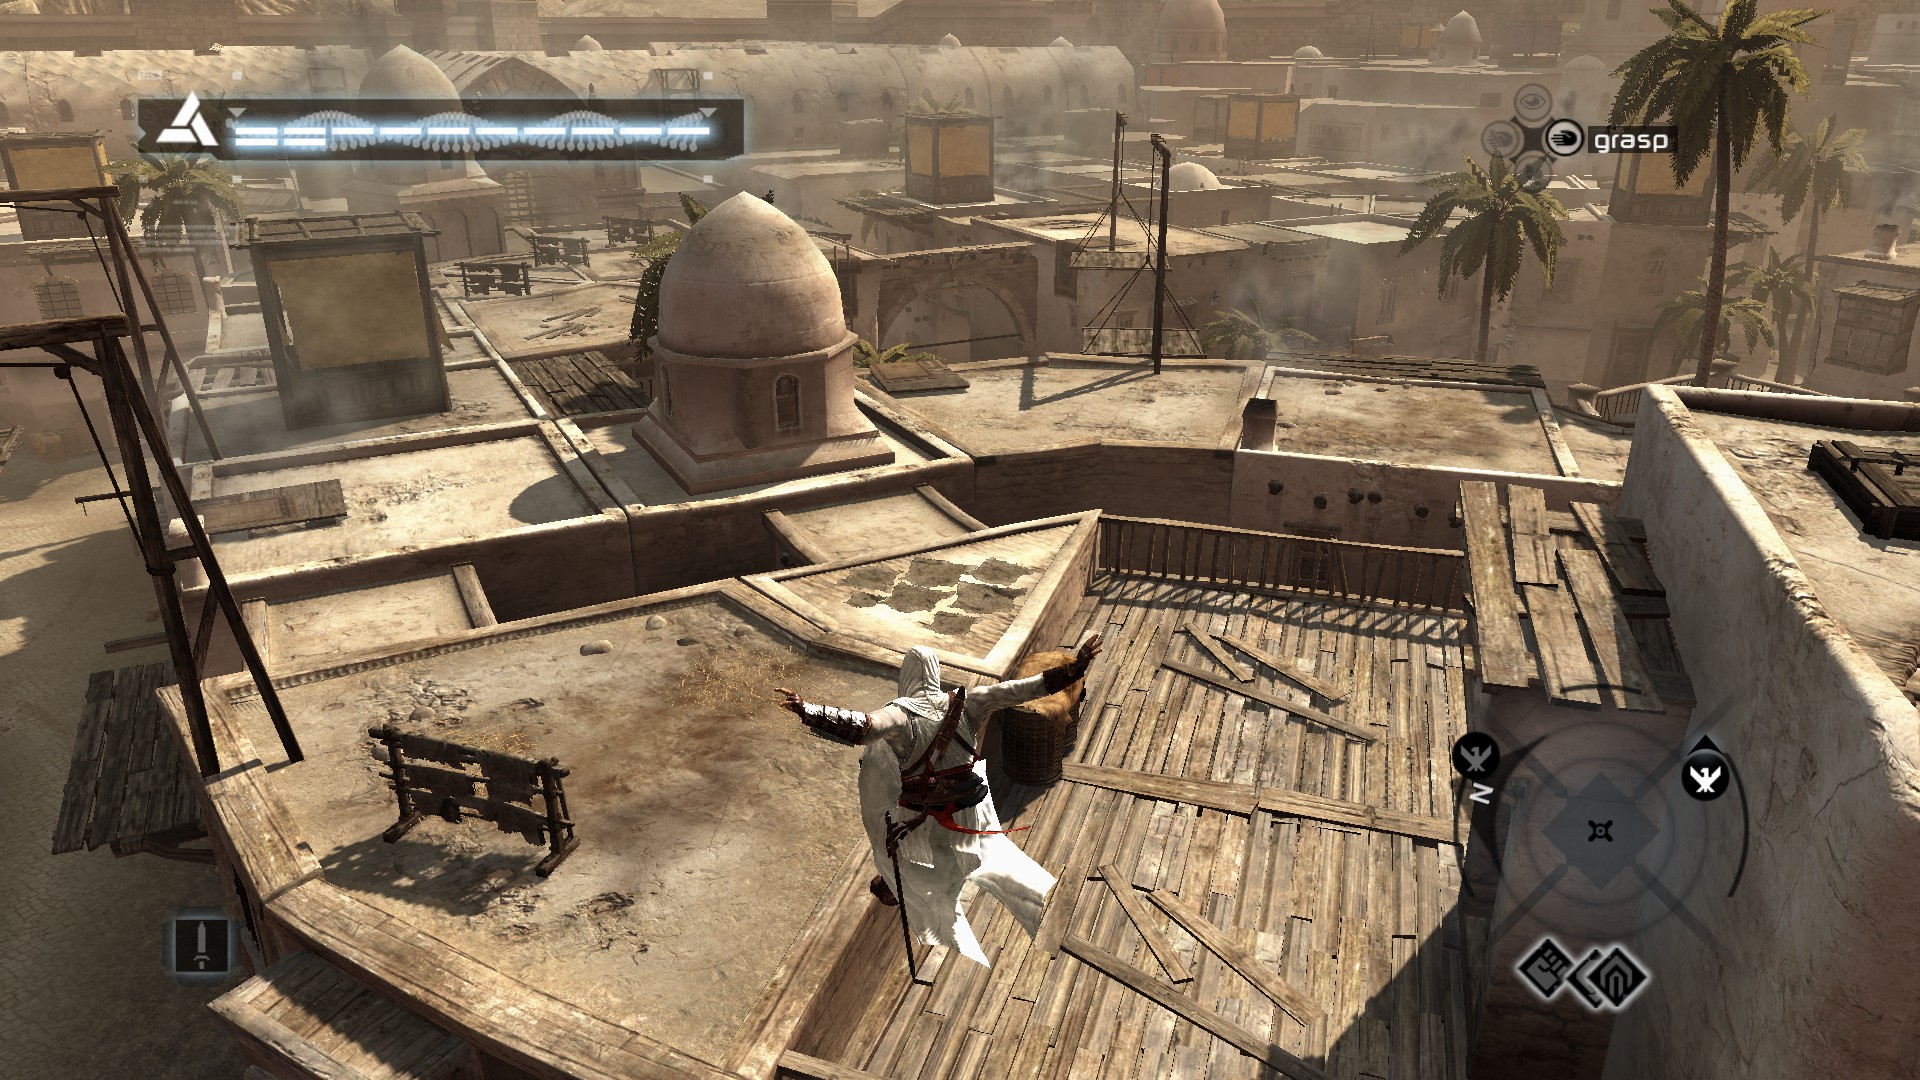 The original Assassin's Creed (PC Game 2008) Play again the one that got it  all started - Assassins! 